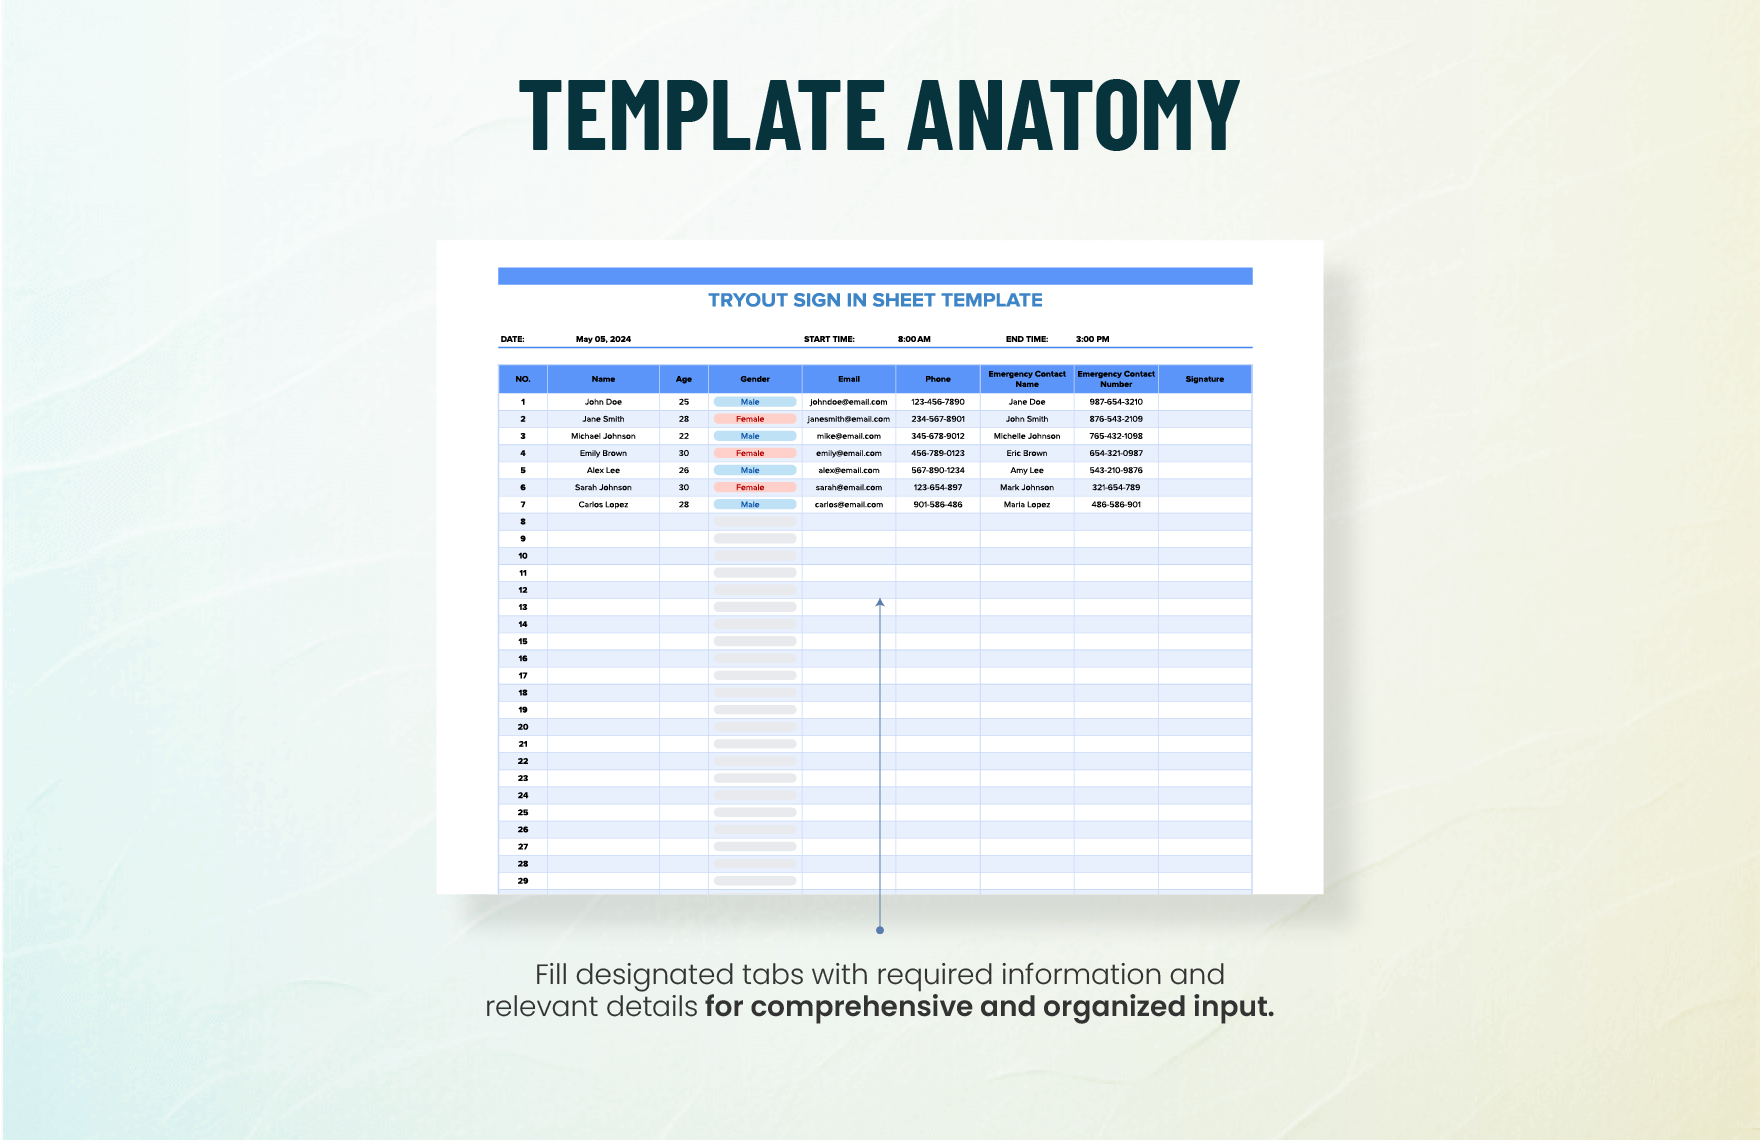 Tryout Sign in Sheet Template